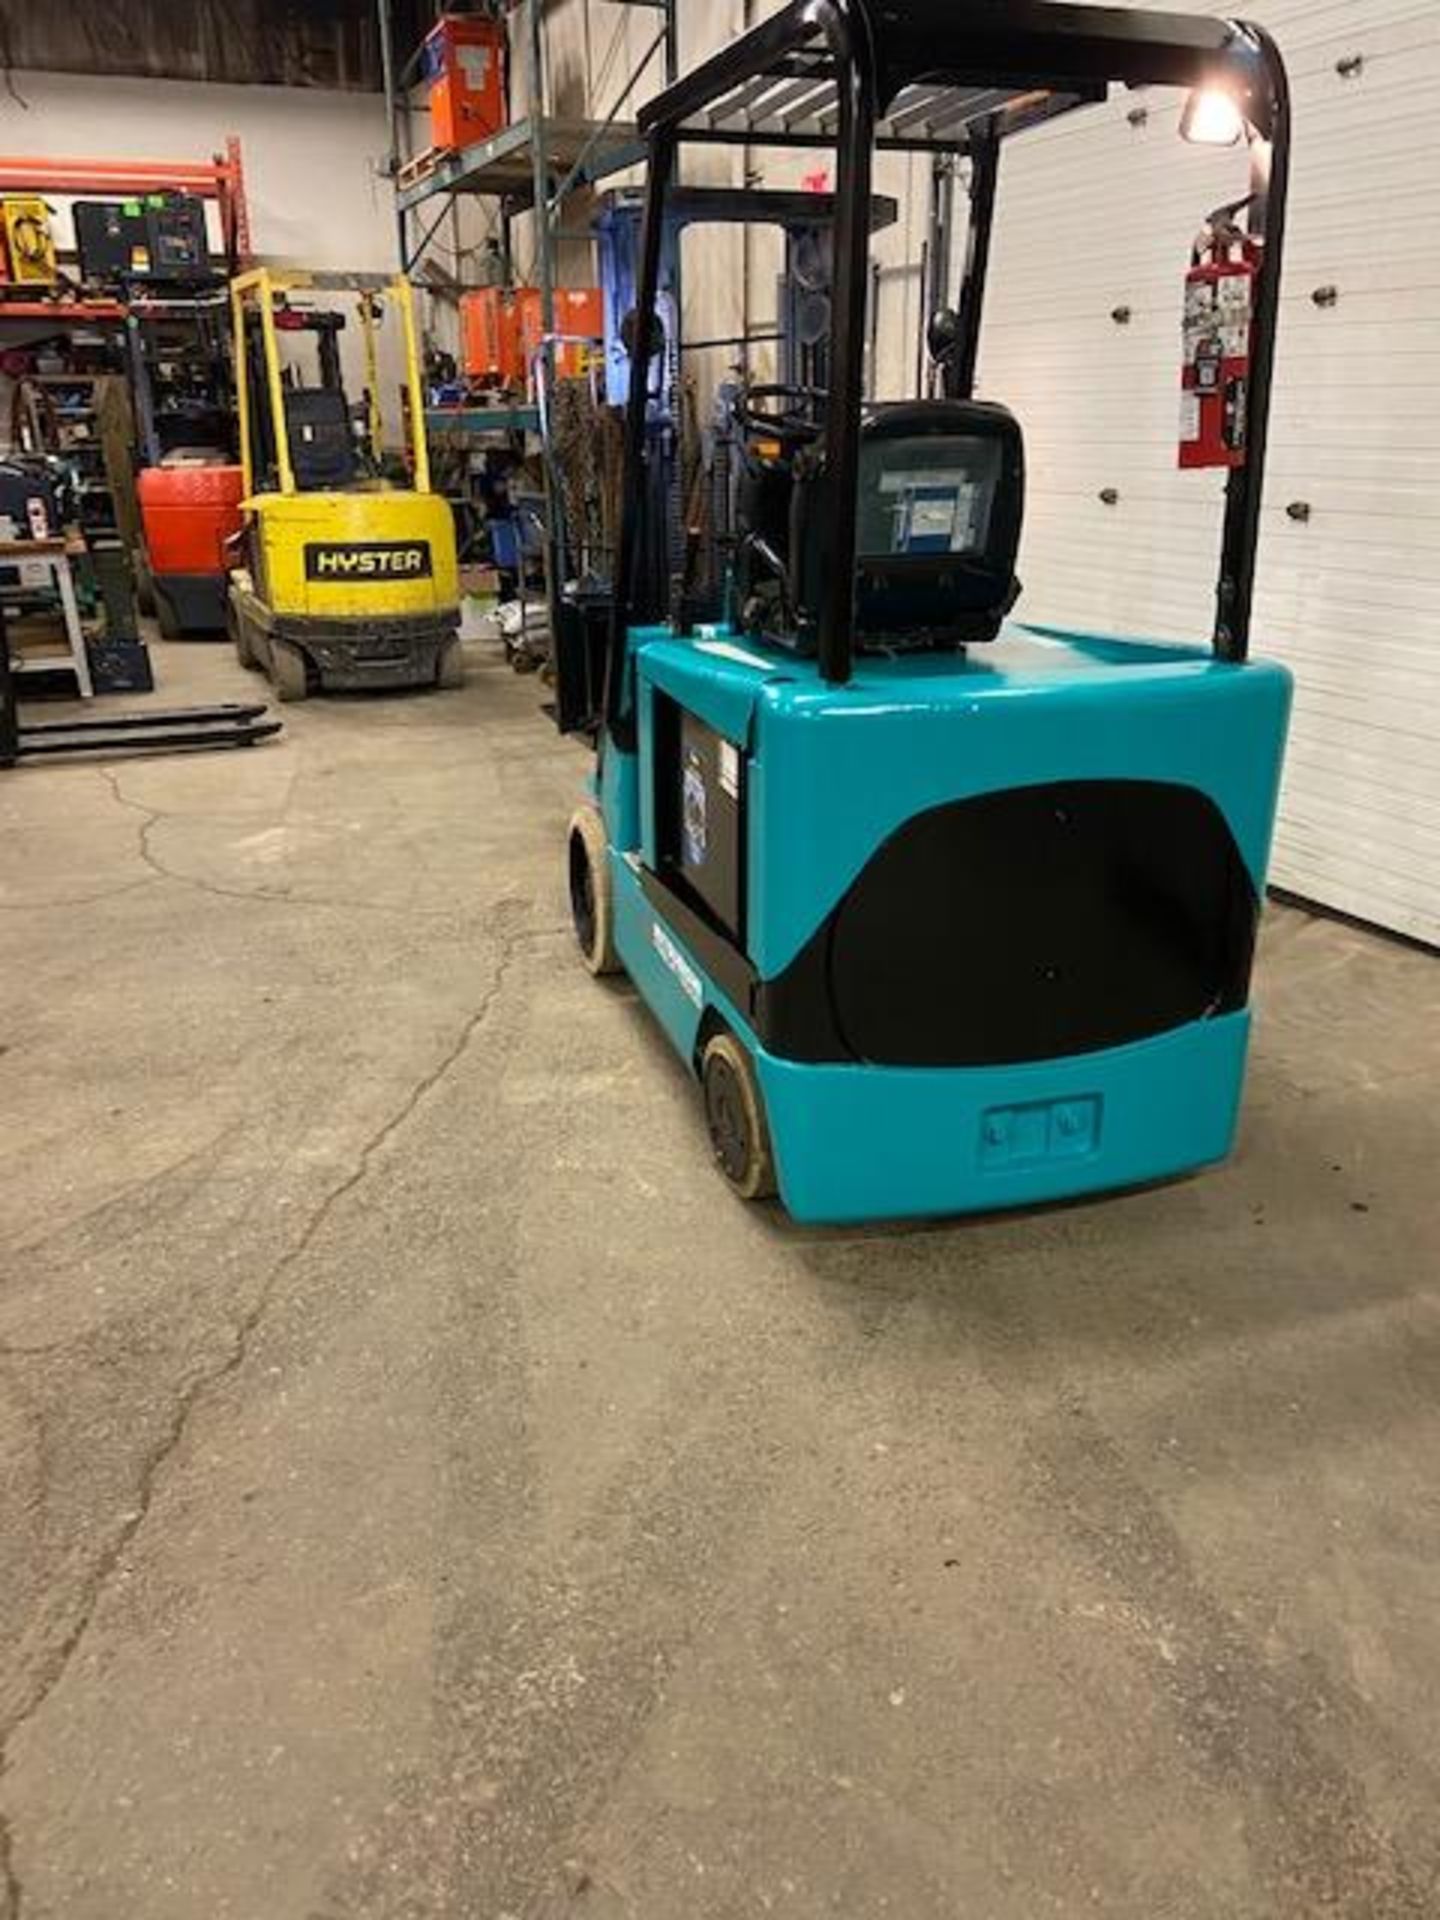 FREE CUSTOMS - Mitsubishi 5000lbs Capacity Forklift Electric with 3-stage mast with sideshift - Image 3 of 3